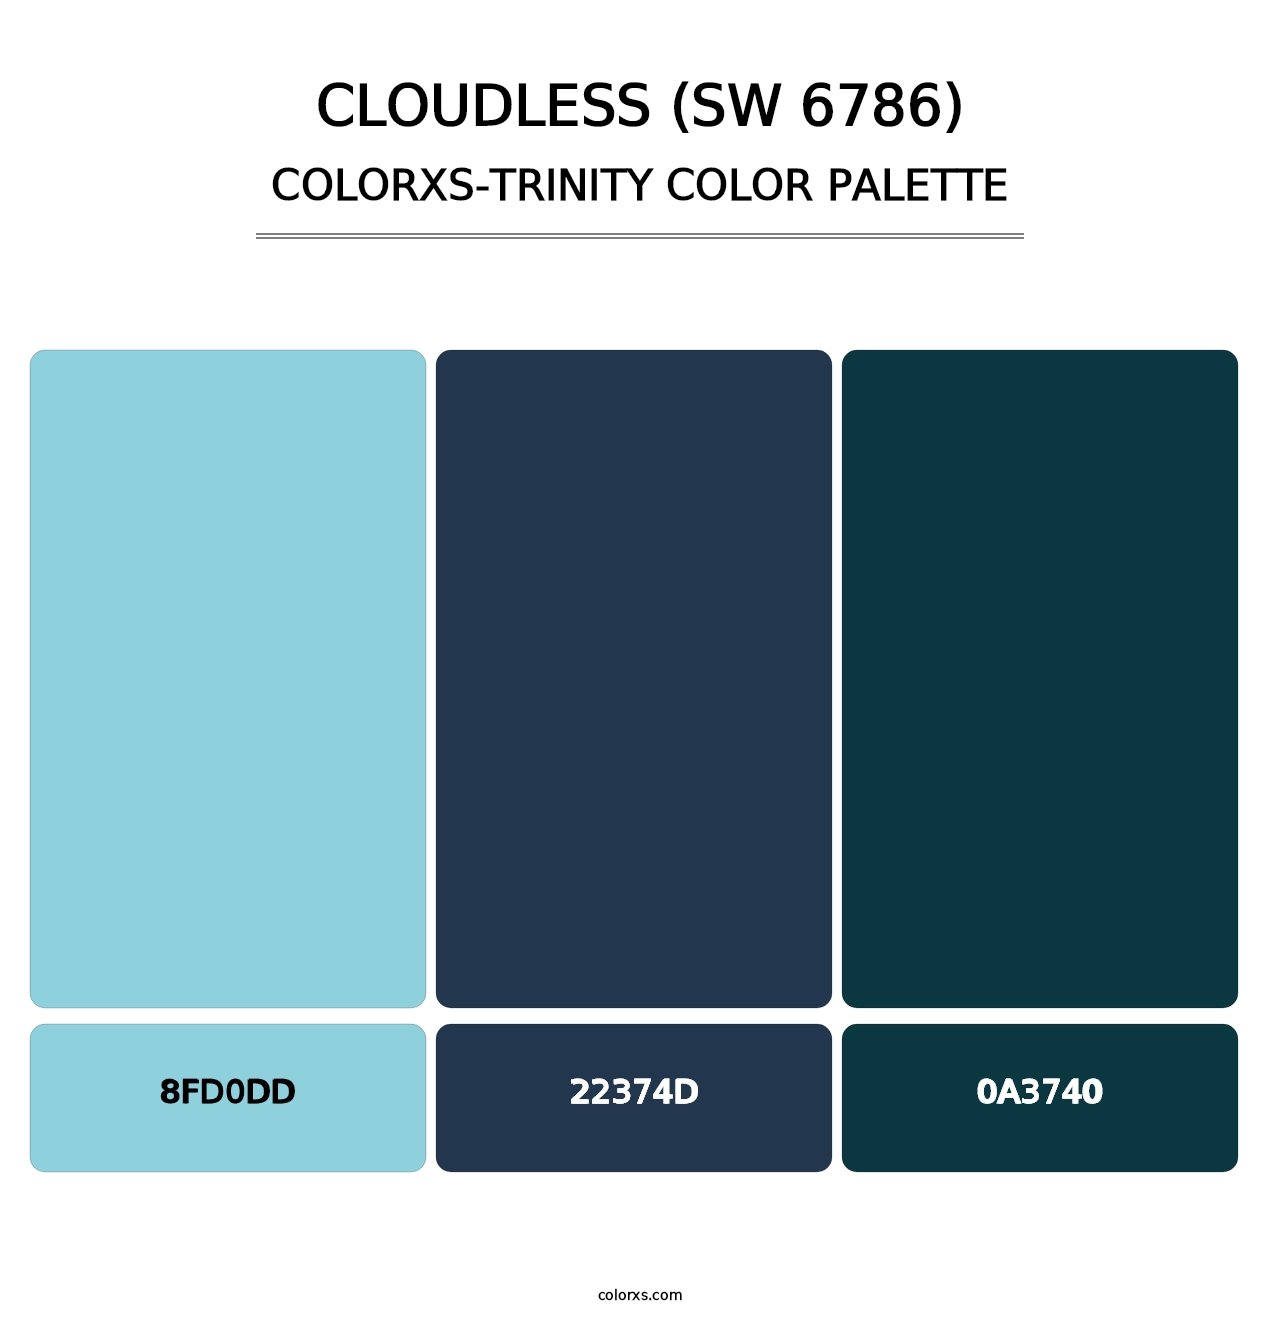 Cloudless (SW 6786) - Colorxs Trinity Palette